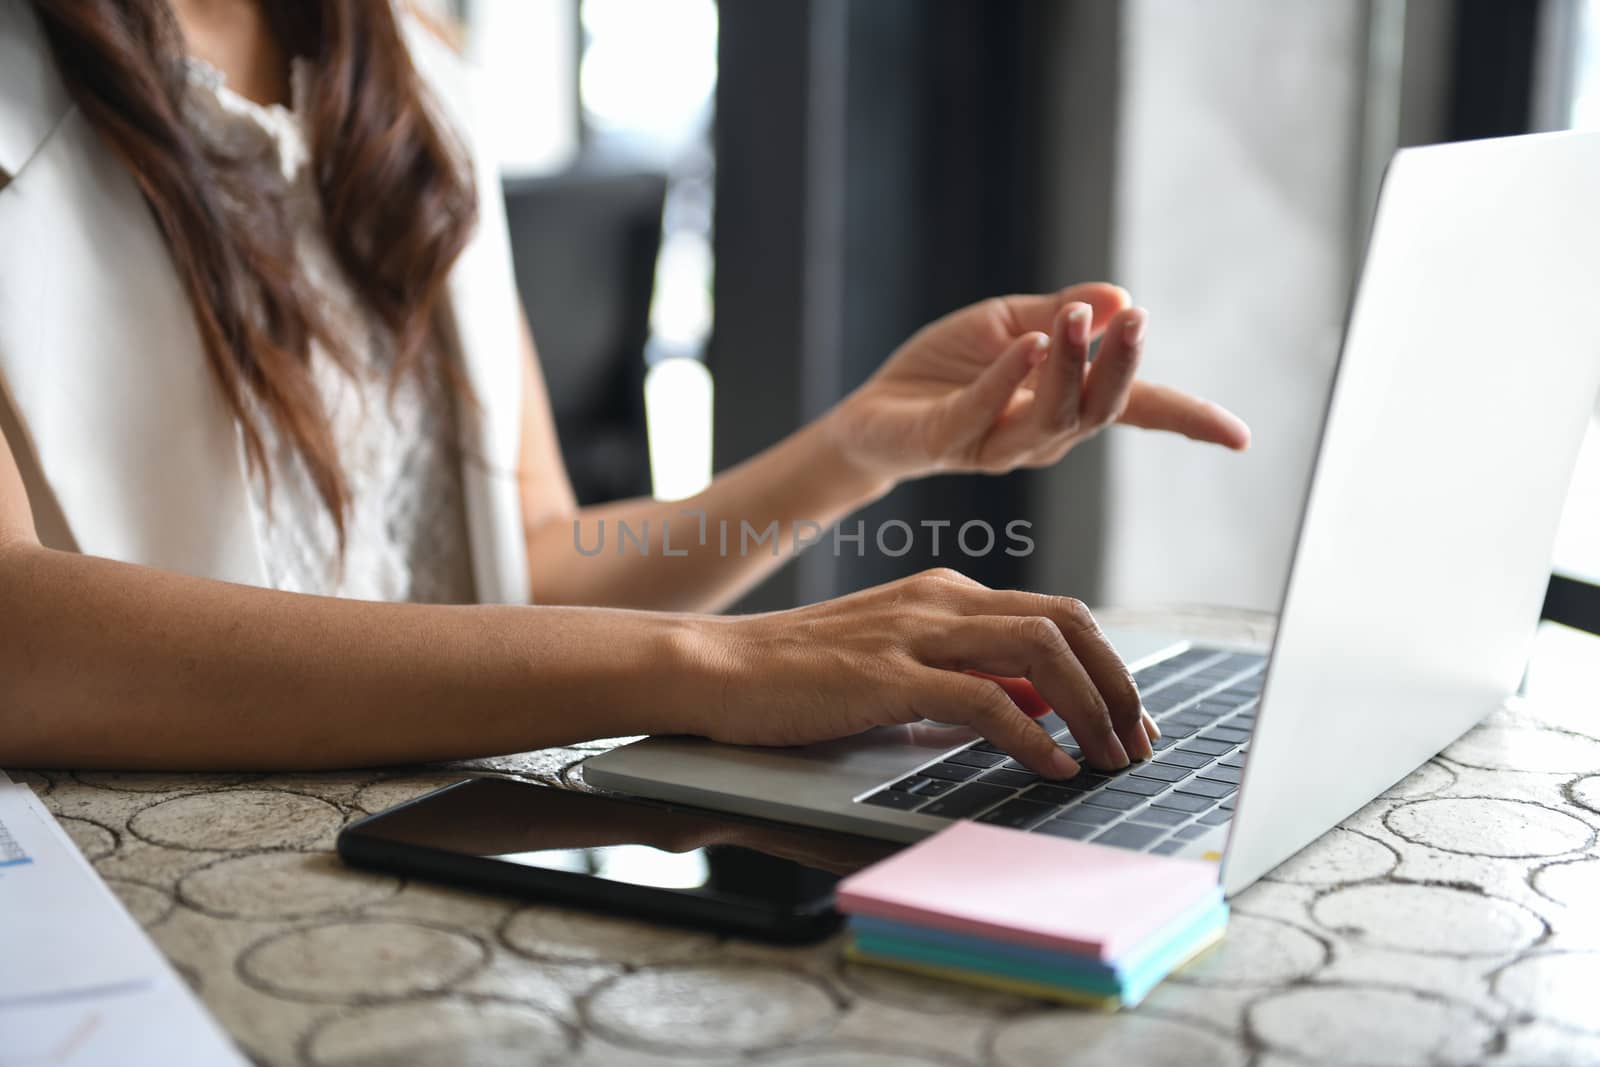 Cropped shot of a businesswoman using a laptop and having a smartphone on her side. She placed her hand on the keyboard and pointed her other hand at the screen.